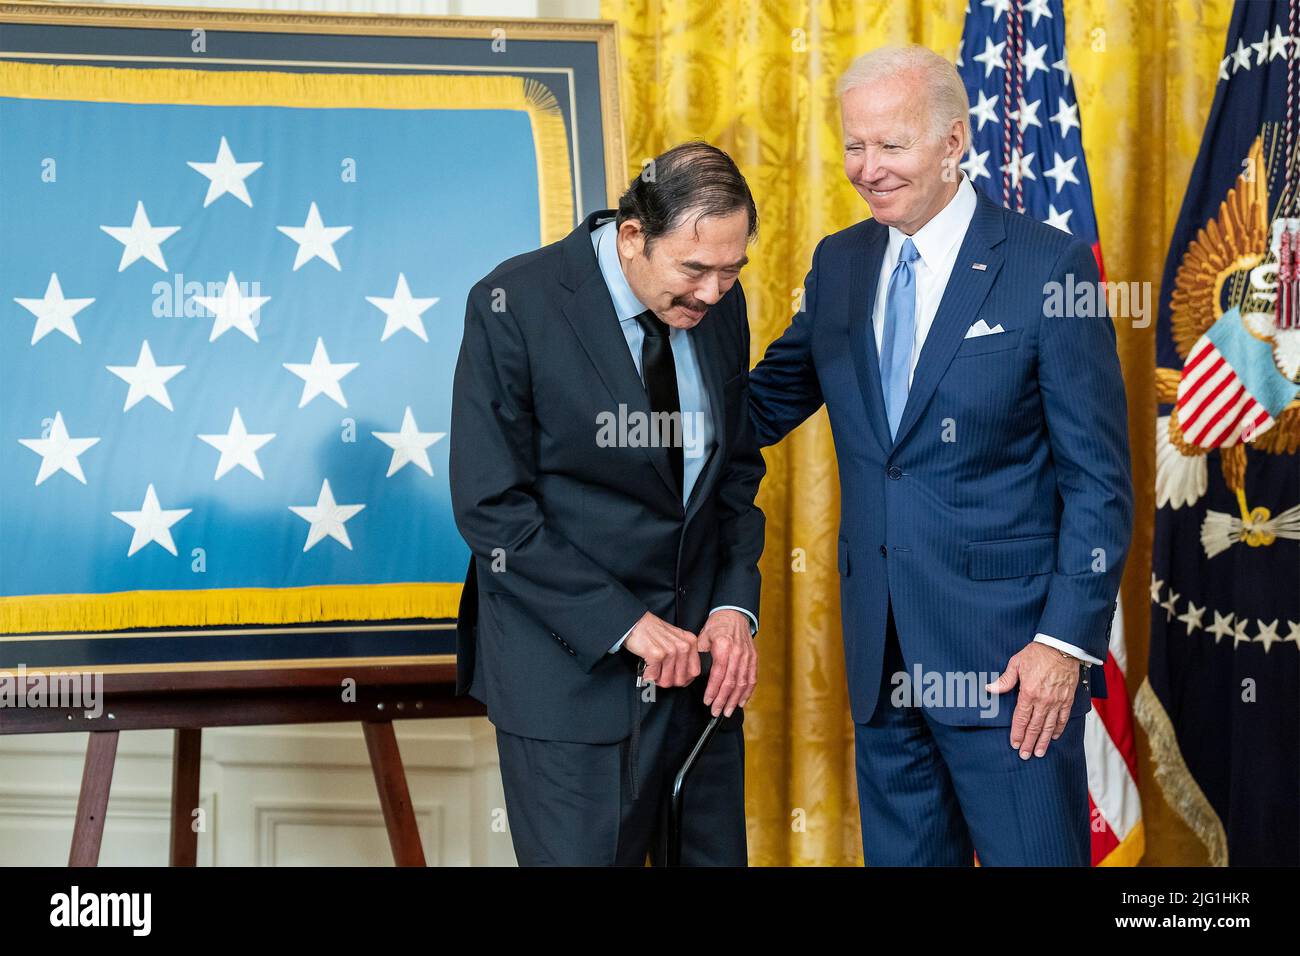 Washington, United States Of America. 05th July, 2022. Washington, United States of America. 05 July, 2022. U.S President Joe Biden, right, congratulates retired Spc. Dennis Fujii after presenting him with the Medal of Honor for his actions during the Vietnam War at a ceremony in the East Room of the White House, July 5, 2022 in Washington, DC Credit: Adam Schultz/White House Photo/Alamy Live News Stock Photo